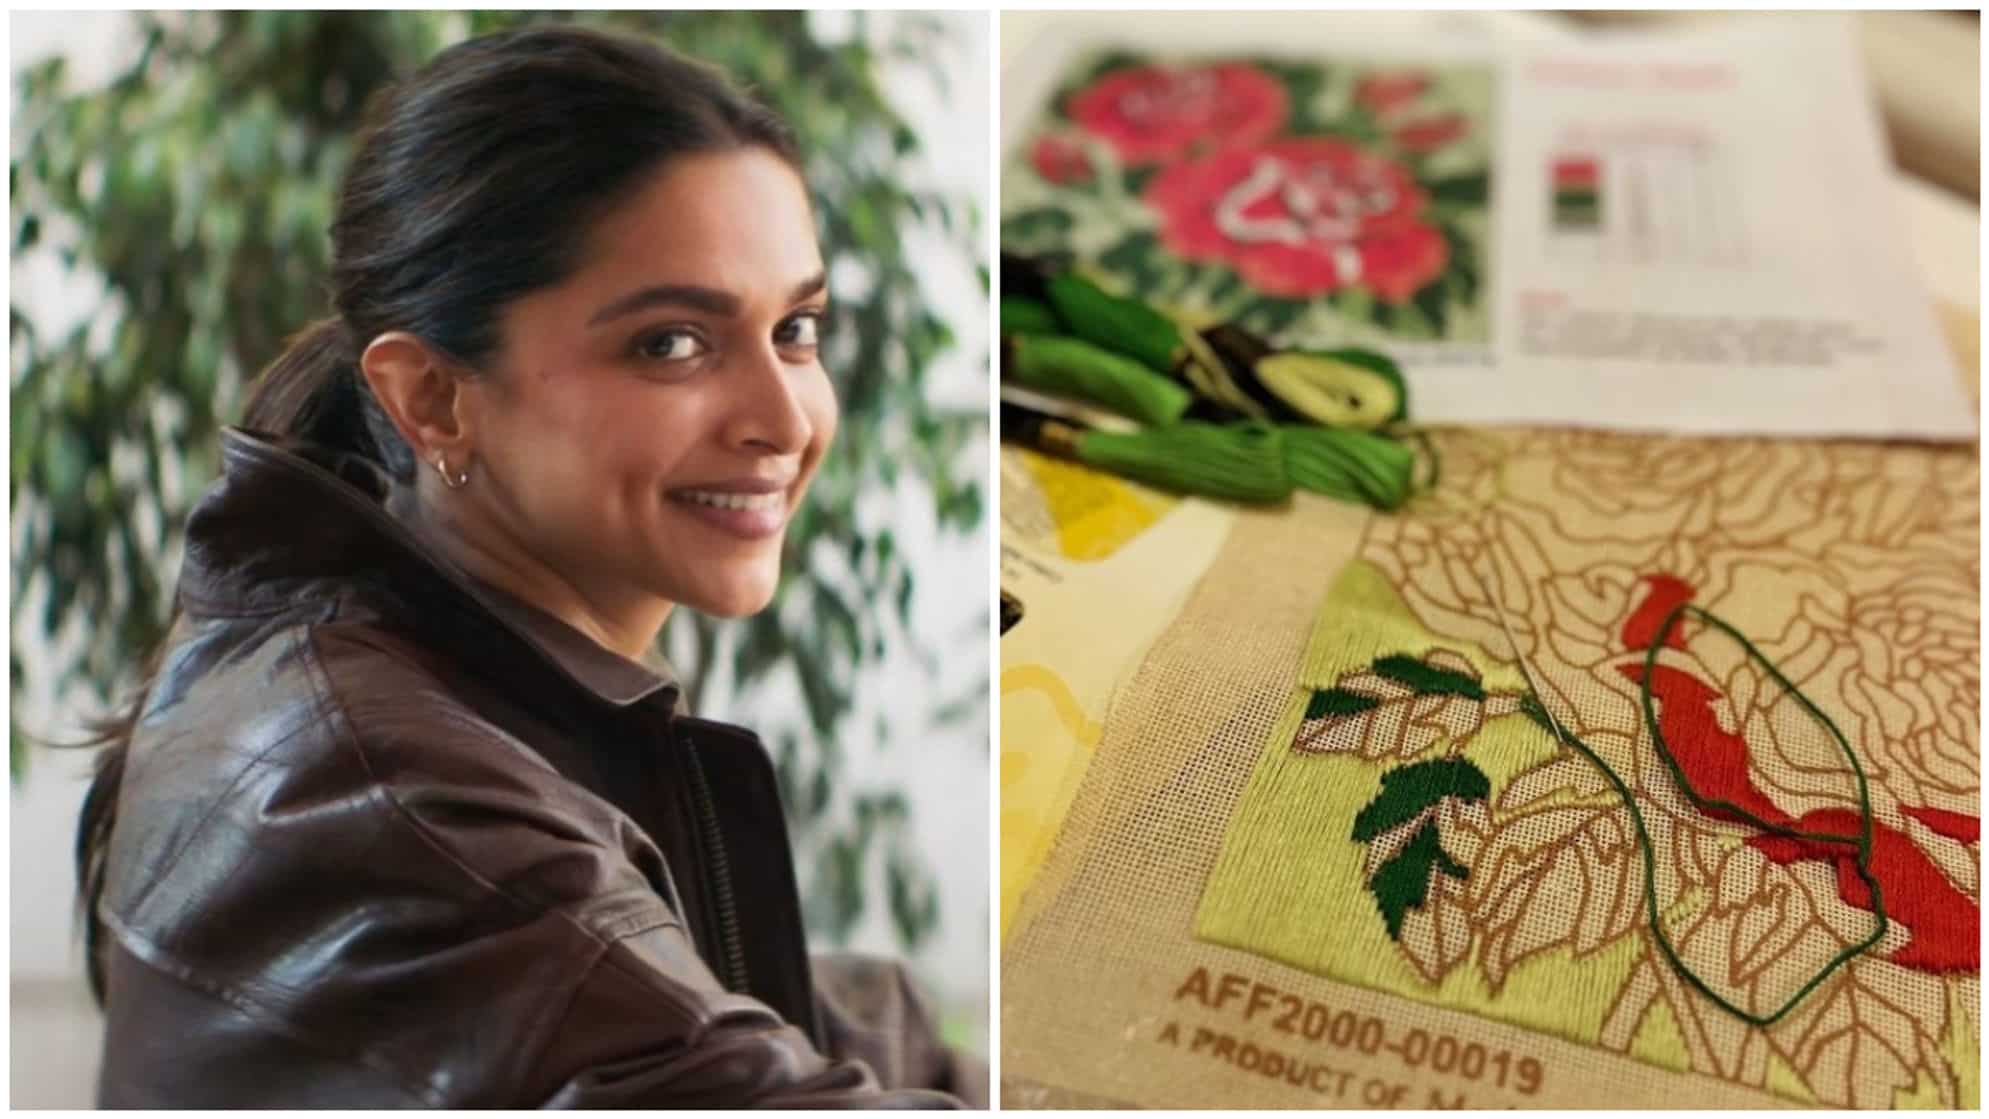 https://www.mobilemasala.com/film-gossip/Deepika-Padukone-tries-her-hands-on-embroidery-during-pregnancy-Fans-react-with-love-i254806